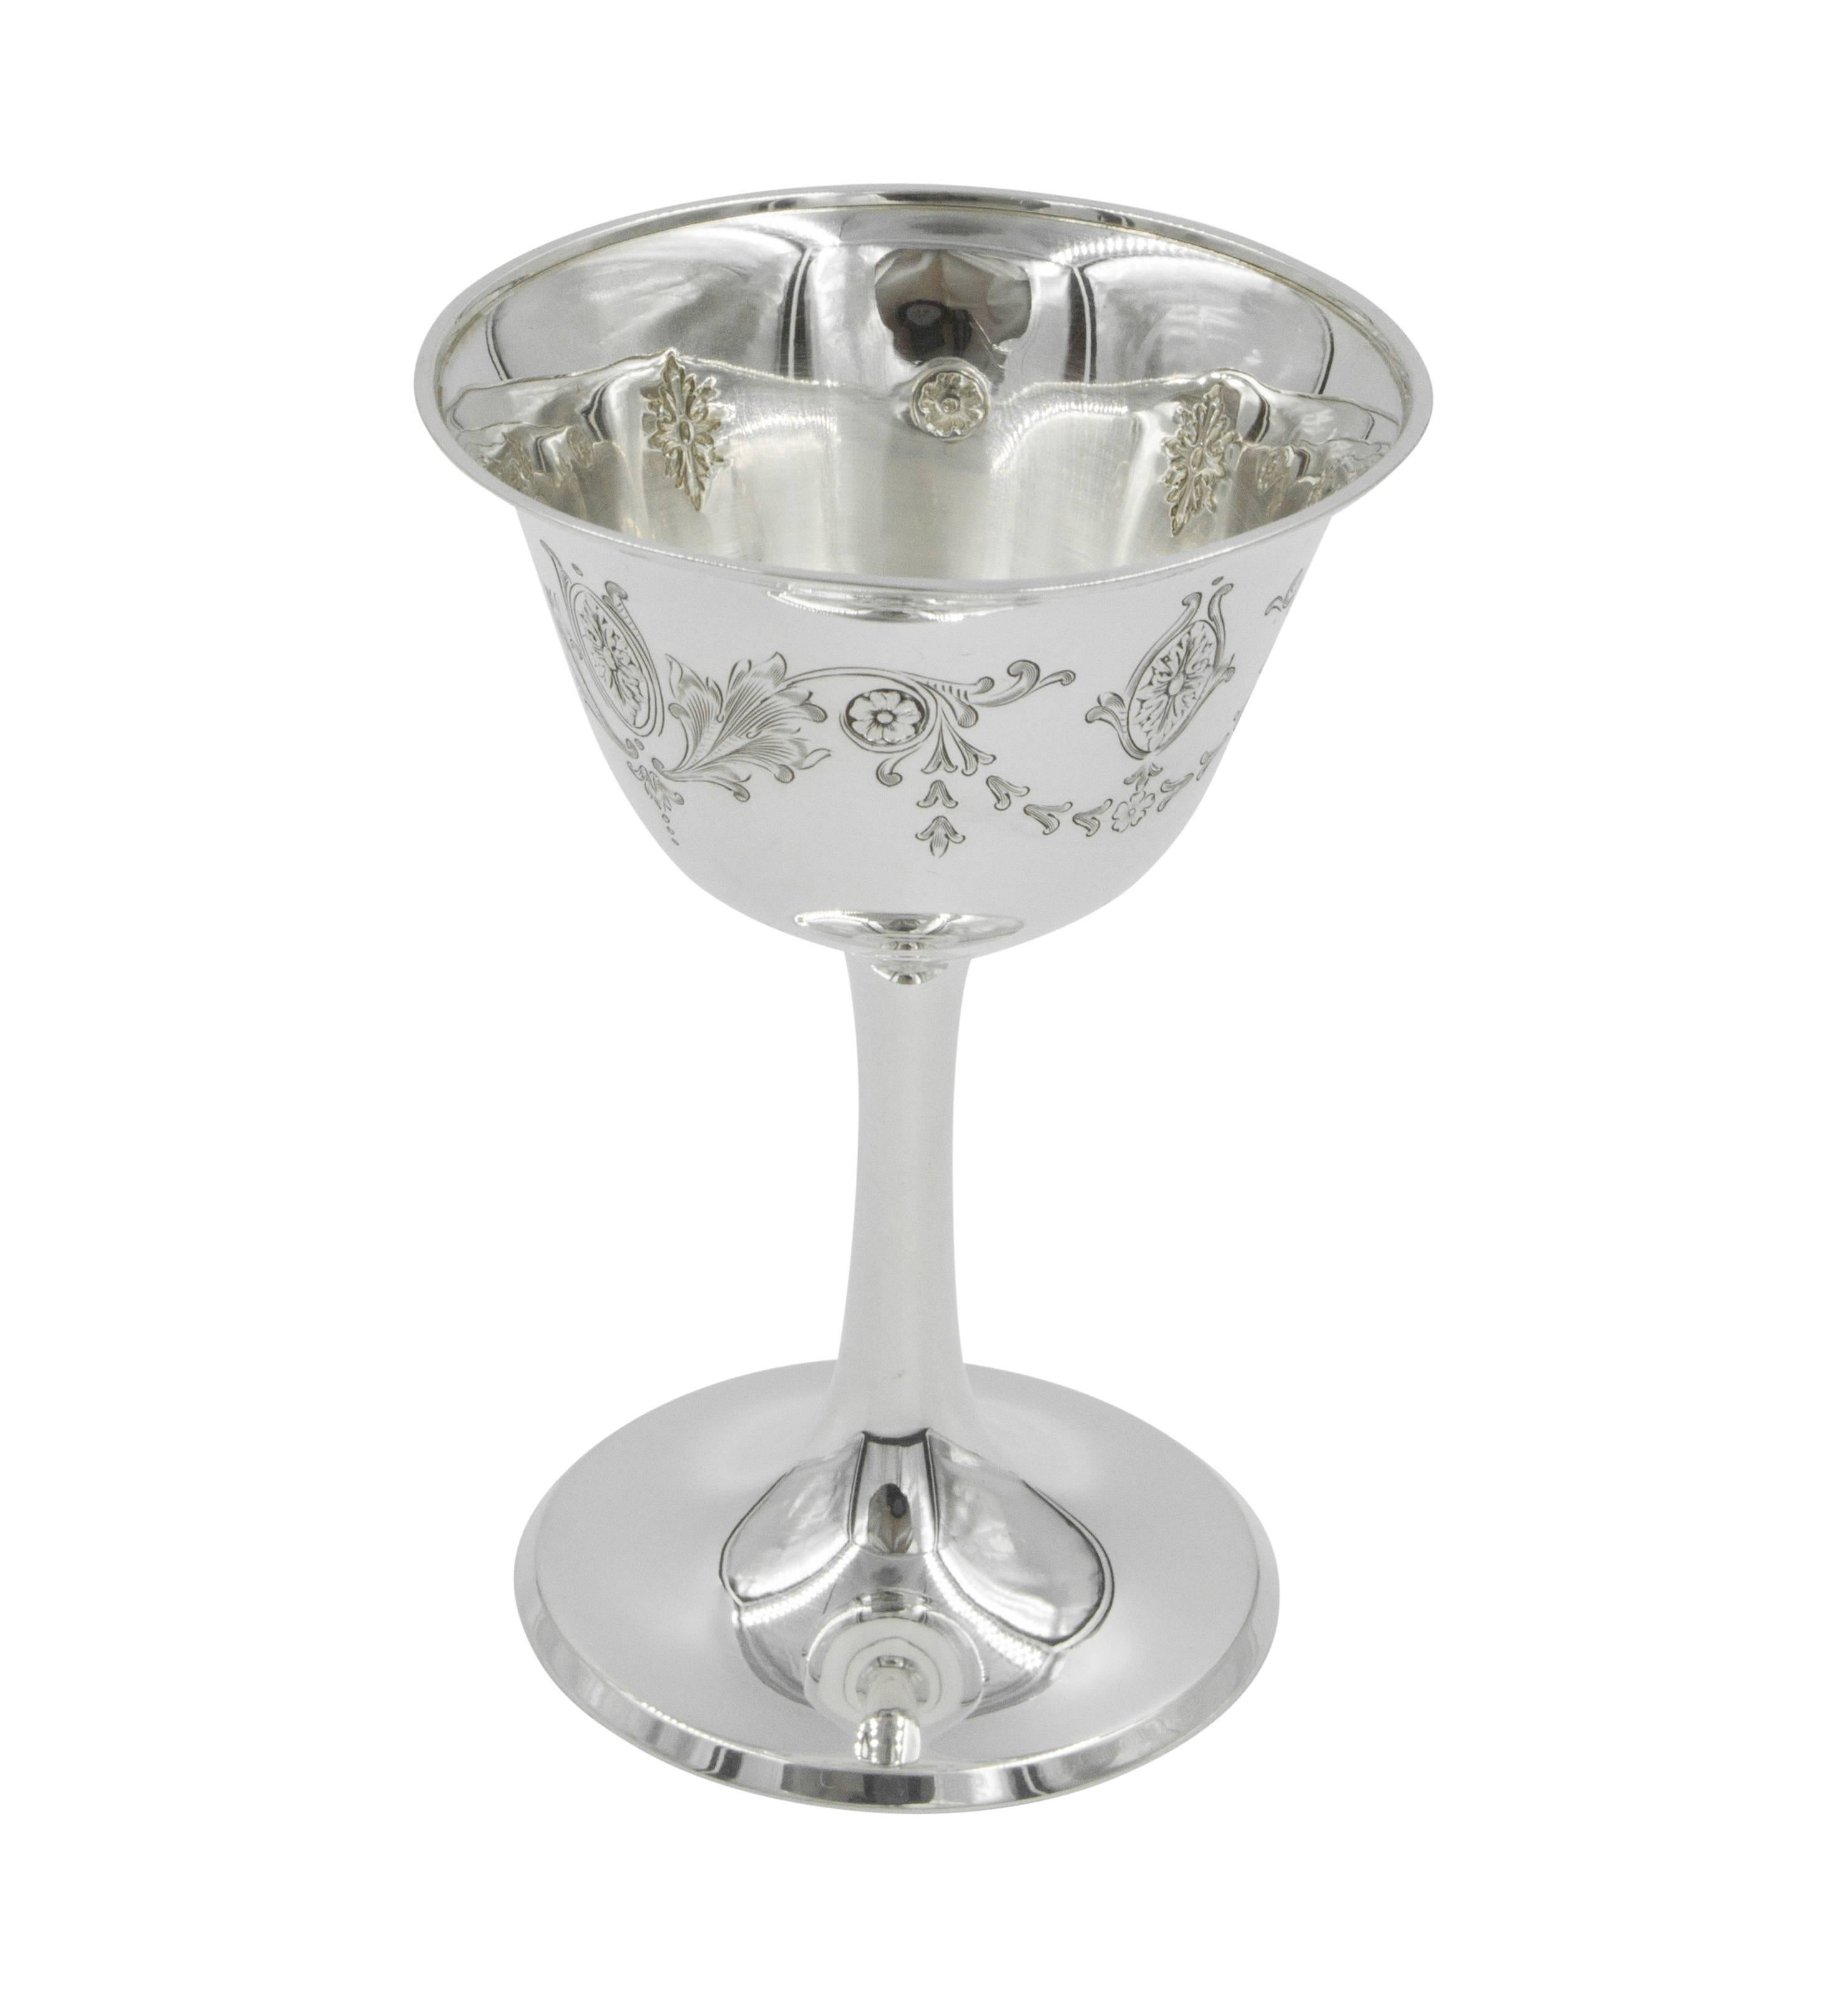 Presented here is a lovely set of 12 dessert cups. Dainty garlands and medallions are etched around the top part while the stem and base are modern.